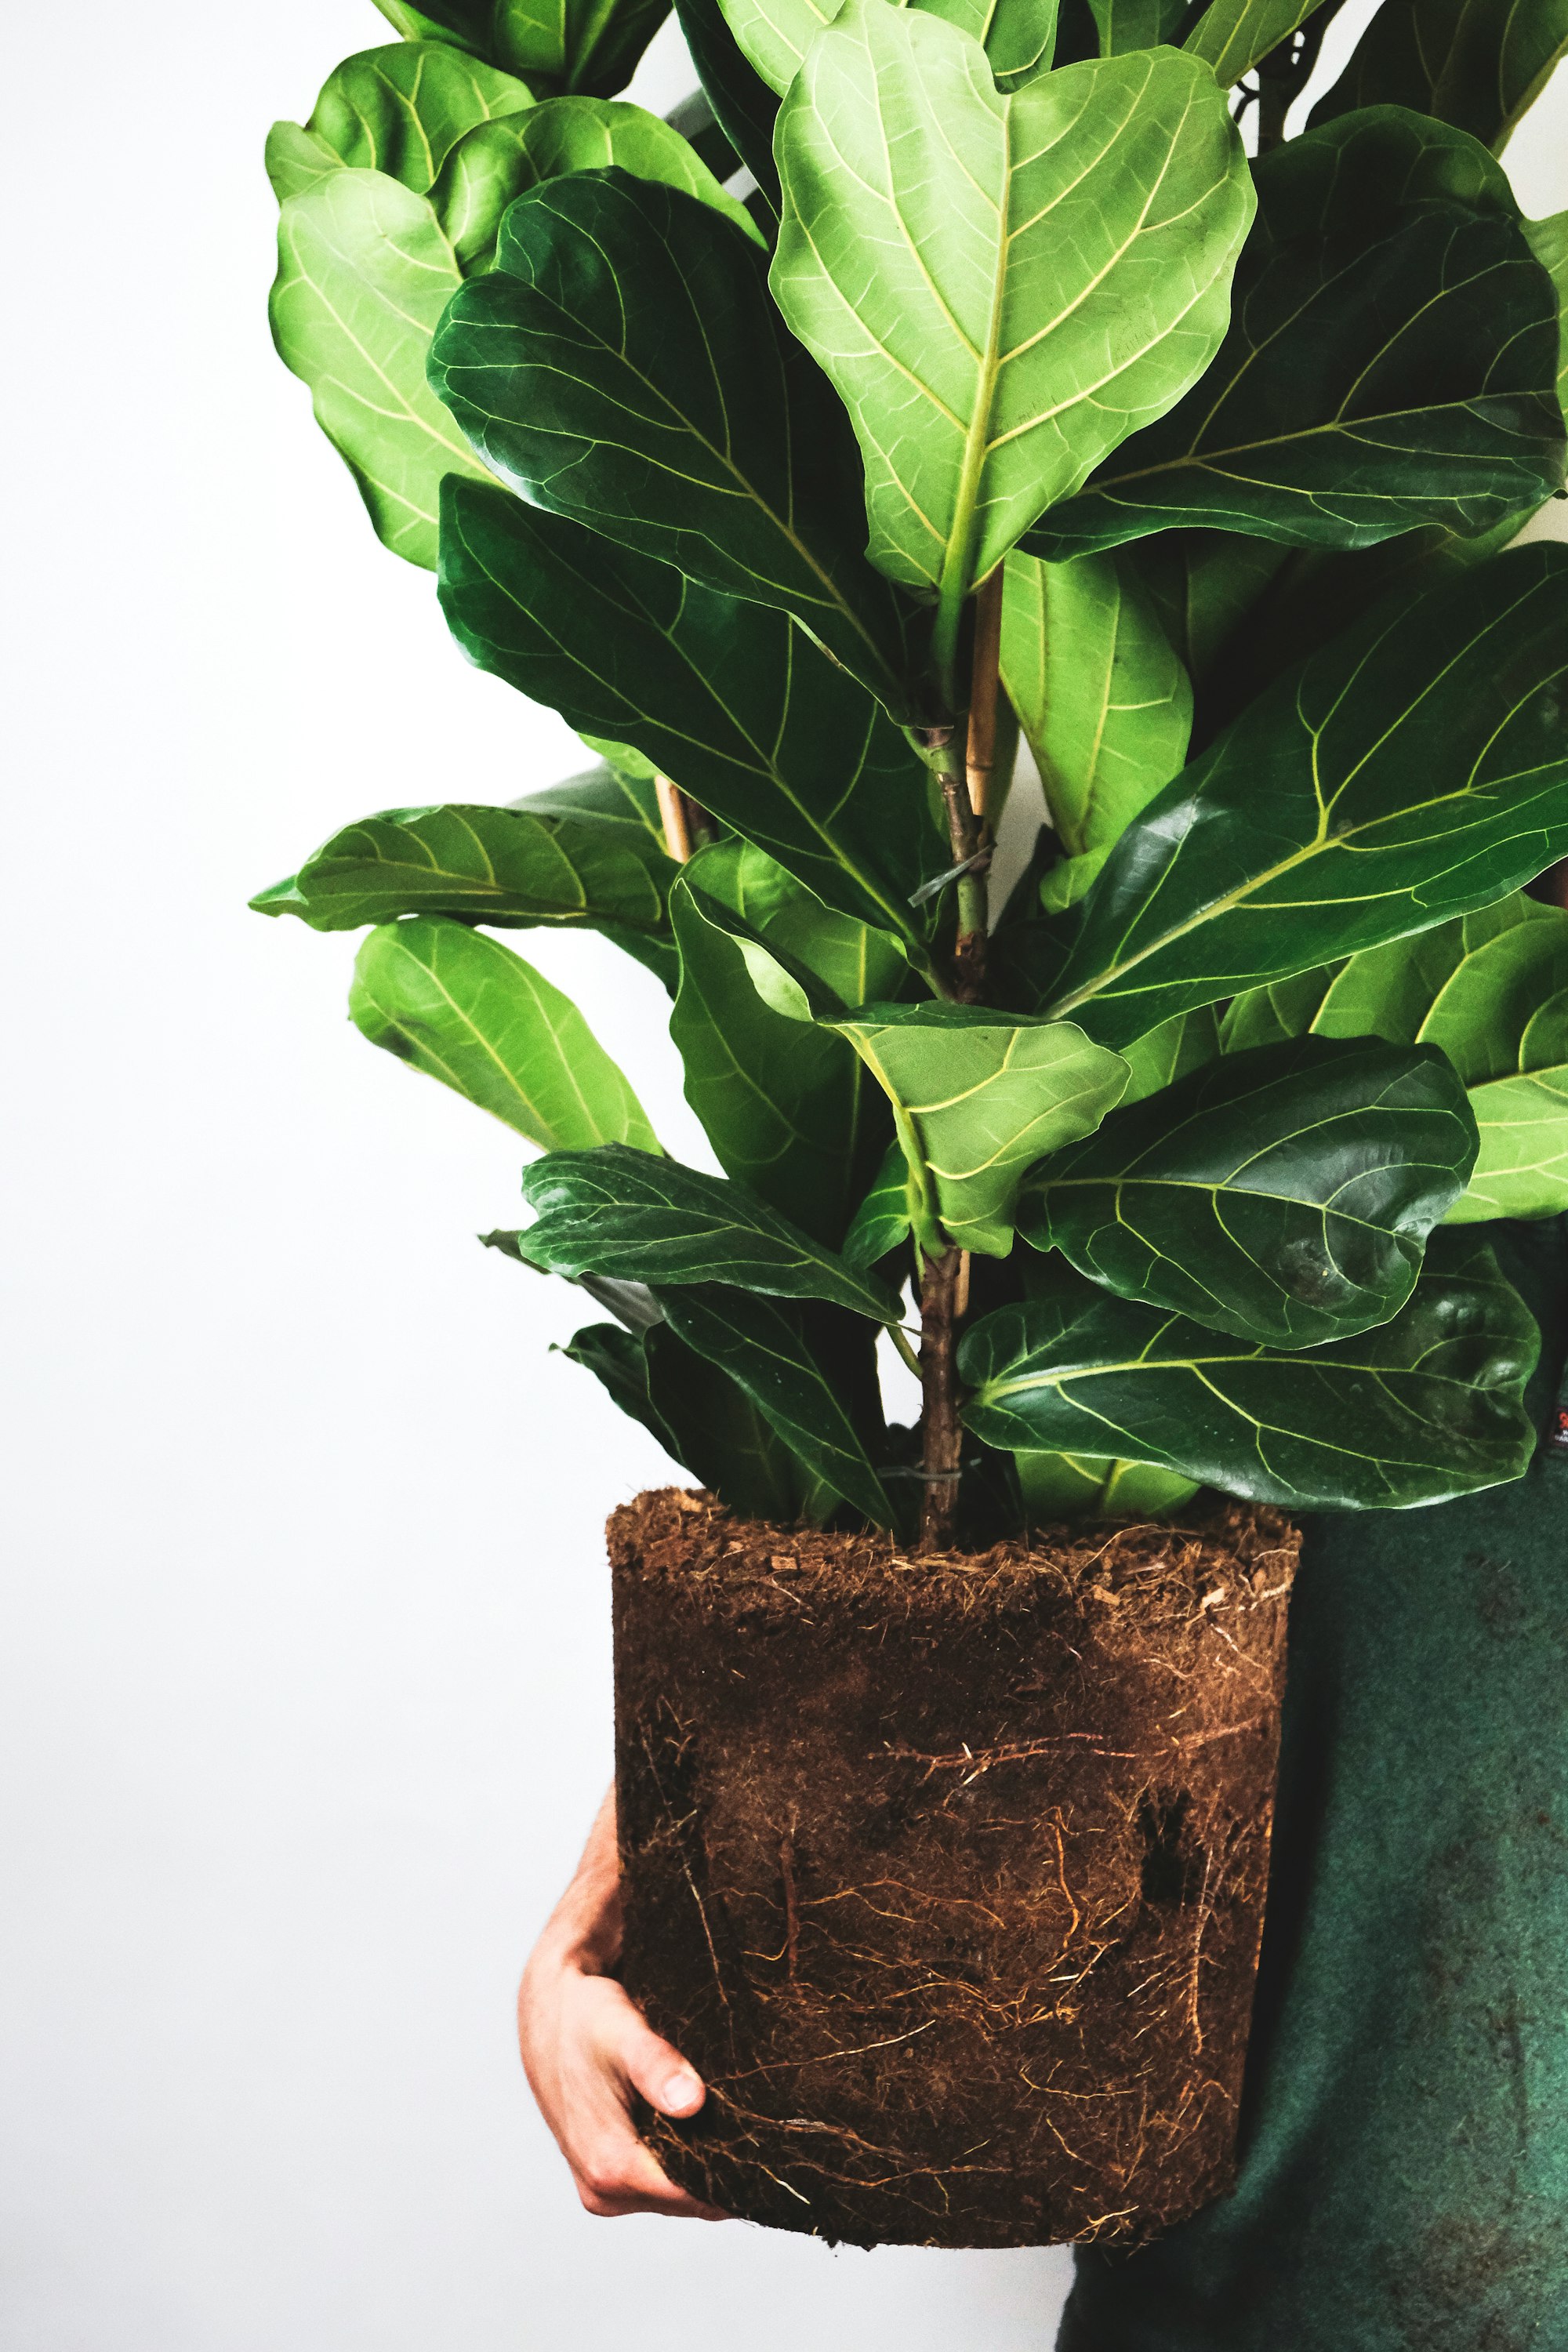 Troubleshooting Fiddle Leaf Fig Problems